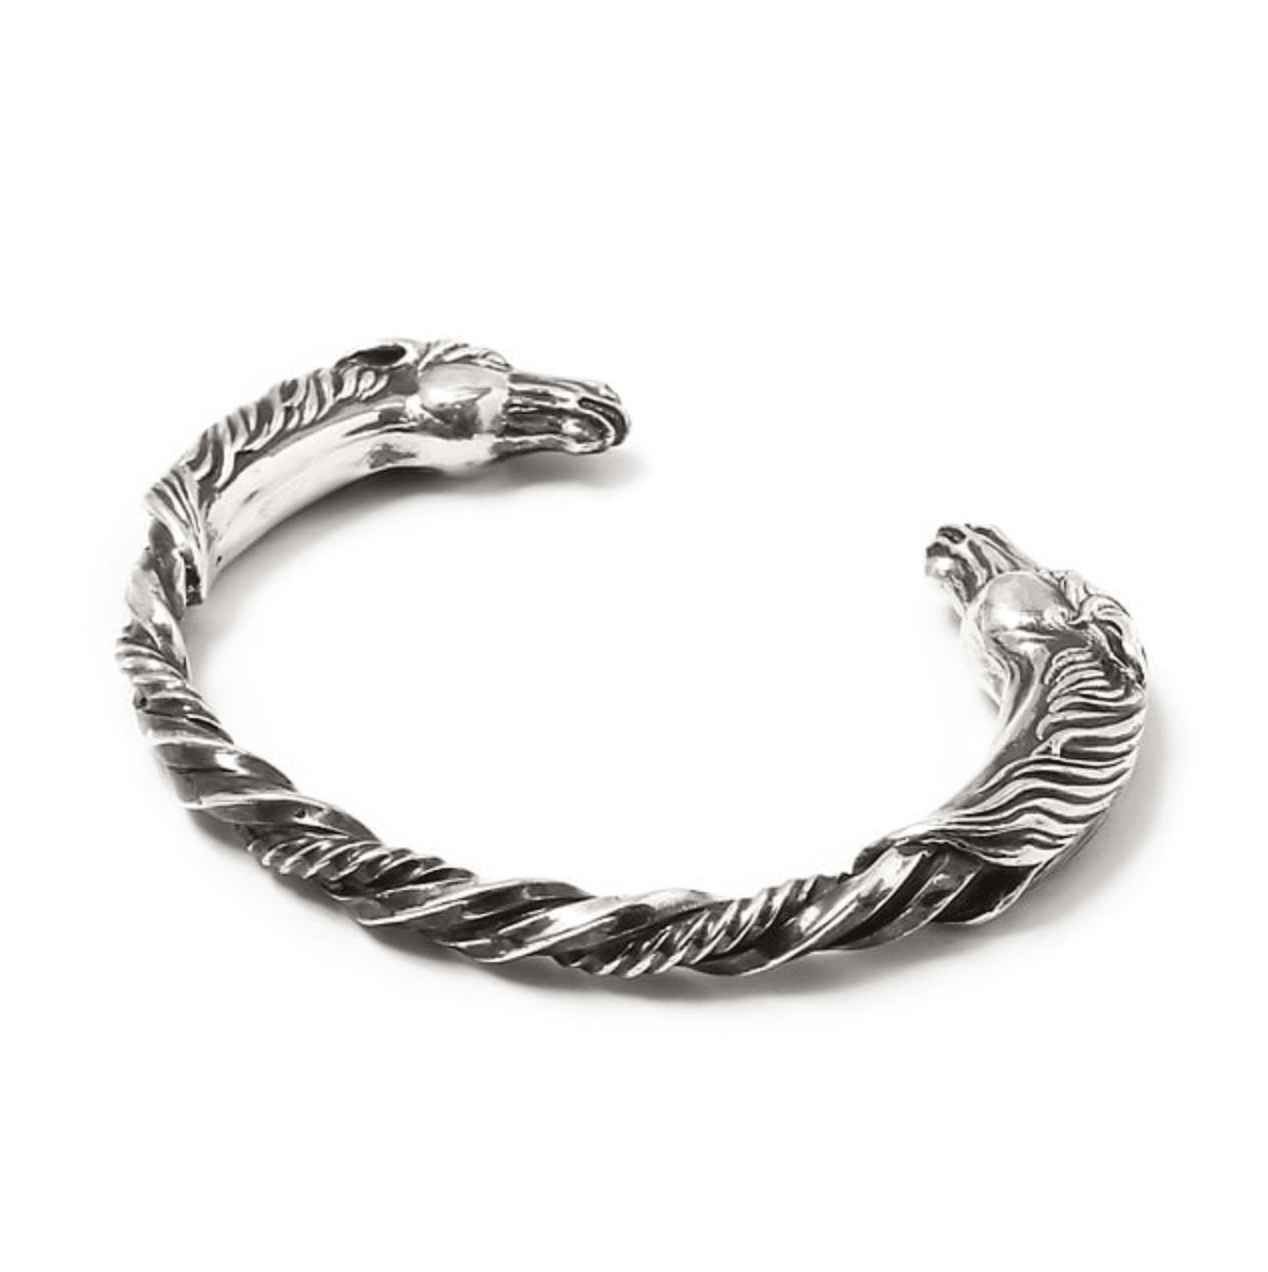 Image showing the Peanuts & Co HORSE TWIST BANGLE - Silver which is a Jewellery described by the following info Accessories, Jewellery, Peanuts & Co, Released and sold on the IRON HEART GERMANY online store